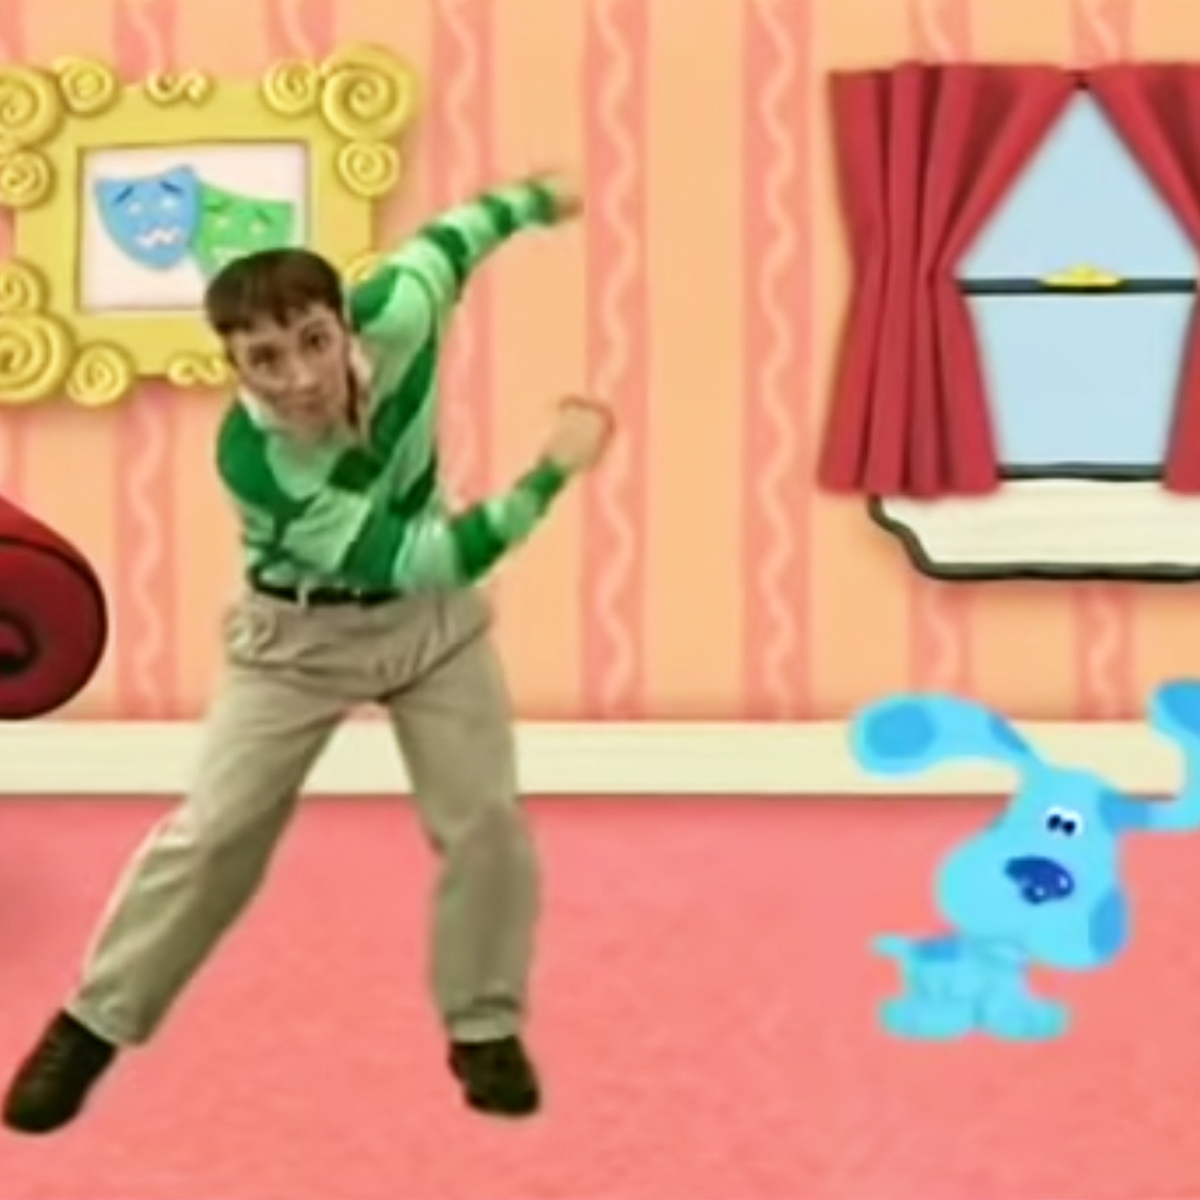 Watch Blue's Clues' Steve Burns' Message to His GrownUp Fans